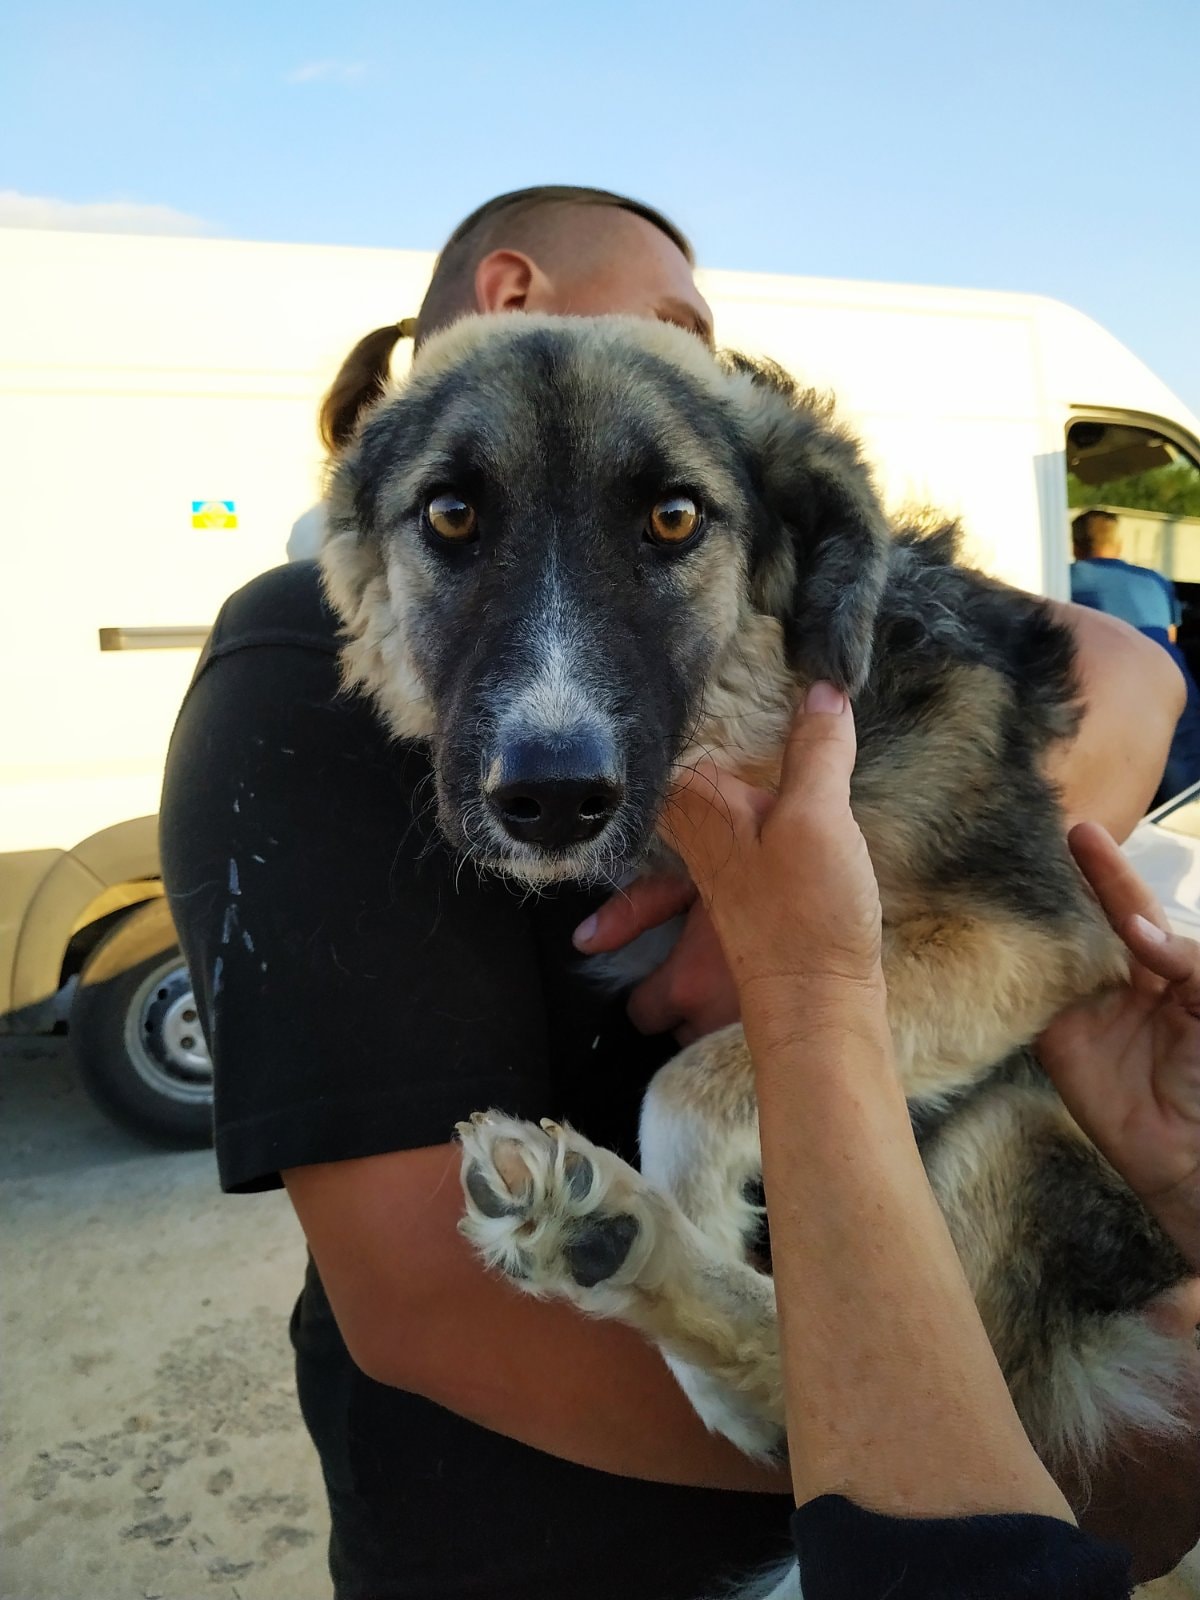 Joy with tears in the eyes: 12 disabled dogs from Nikopol went to EU